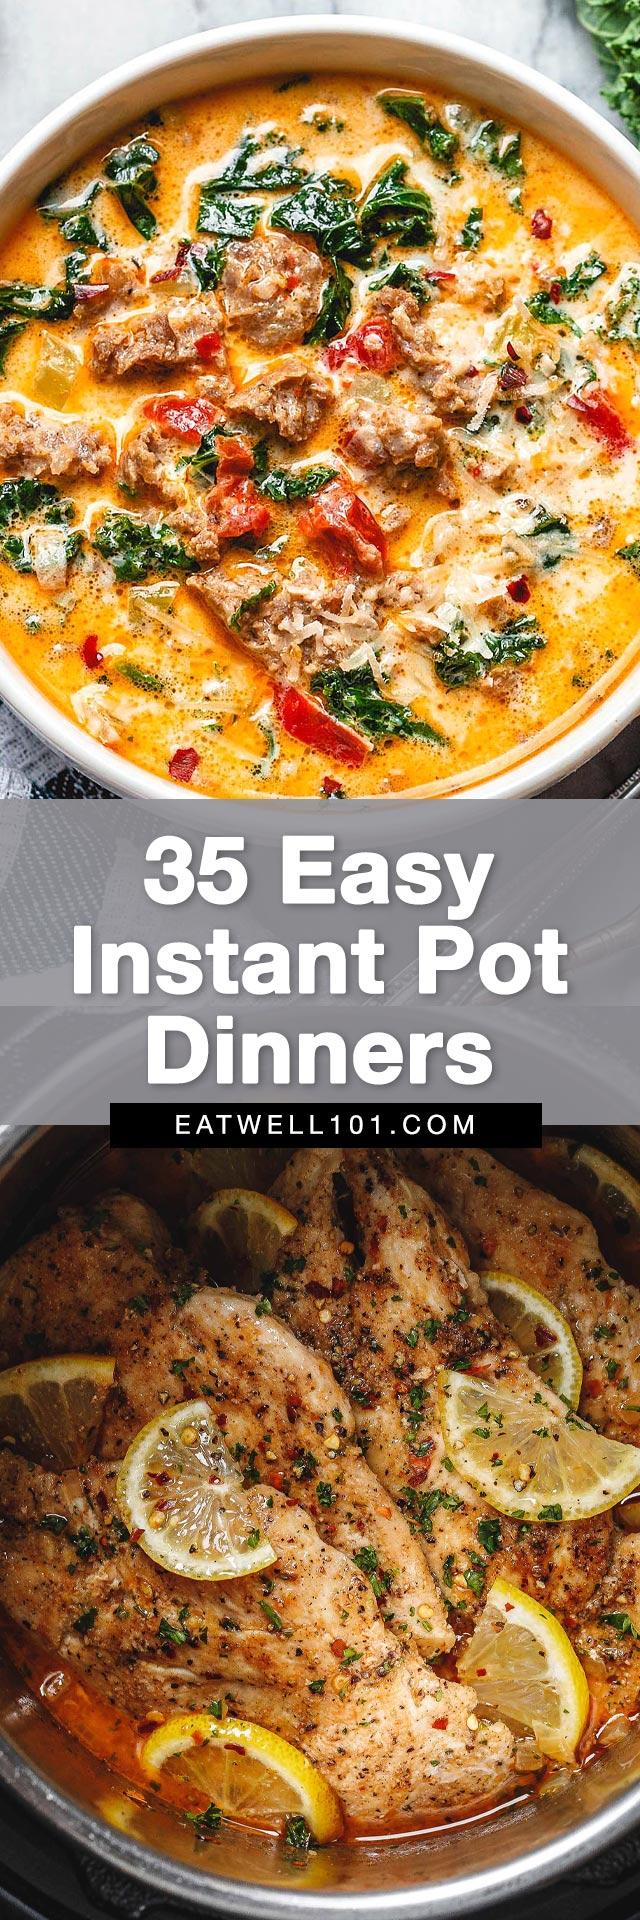 Instant Pot Recipes - #instant-pot #recipes #eatwell101 - These Instant Pot recipes take minutes to prep and you end up with a delicious, no-fuss meal your whole family will love!